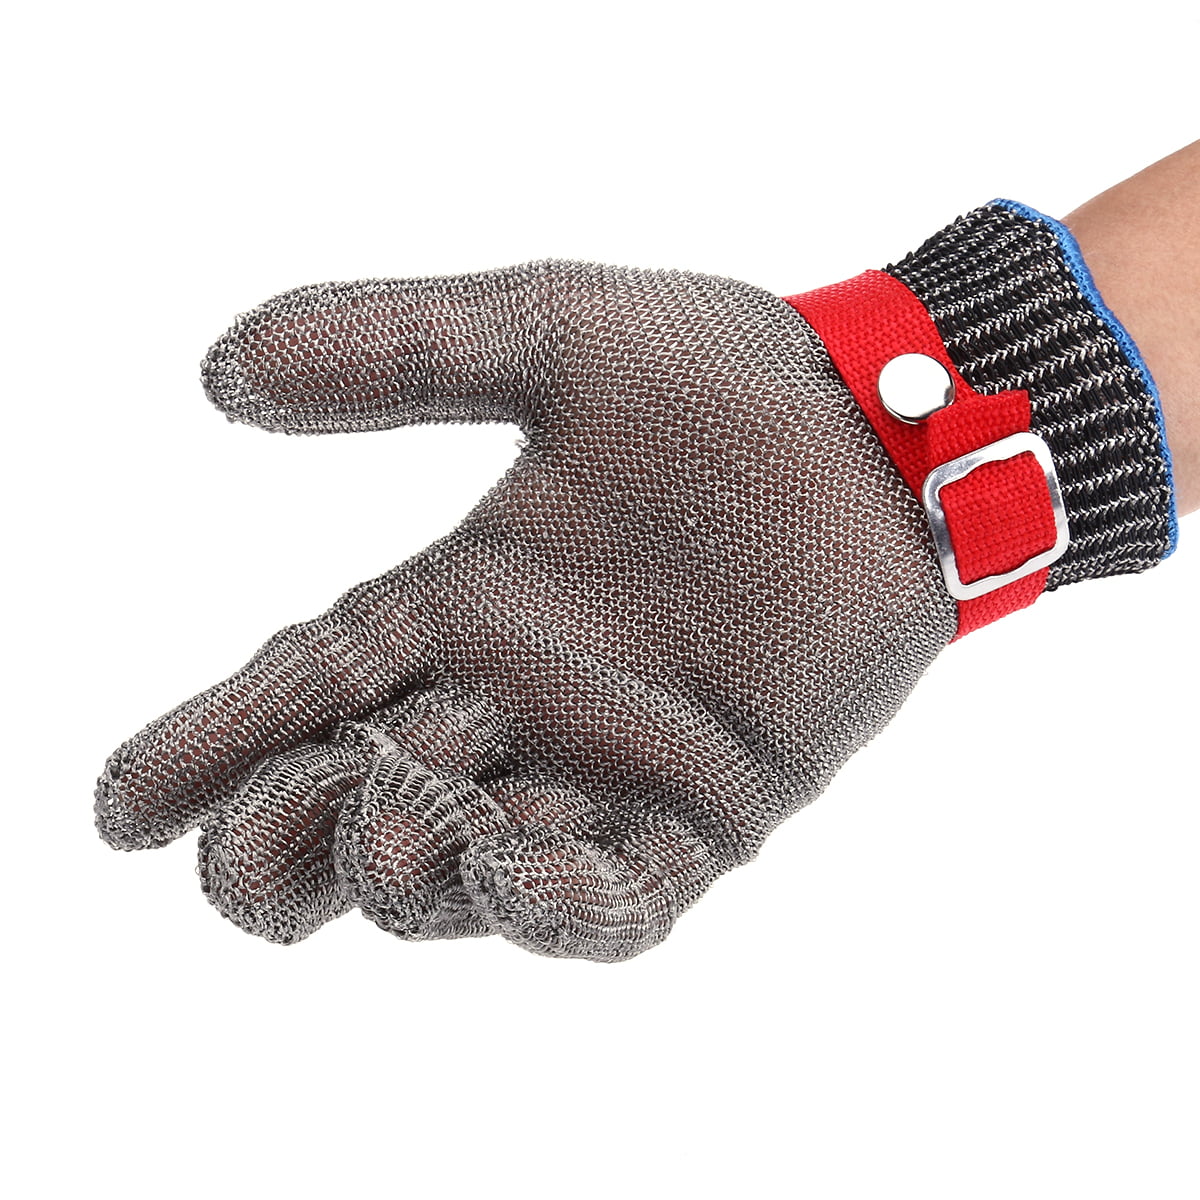 1PCS Anti-Cut Proof Stab Resistant Work Gloves With Metal Button